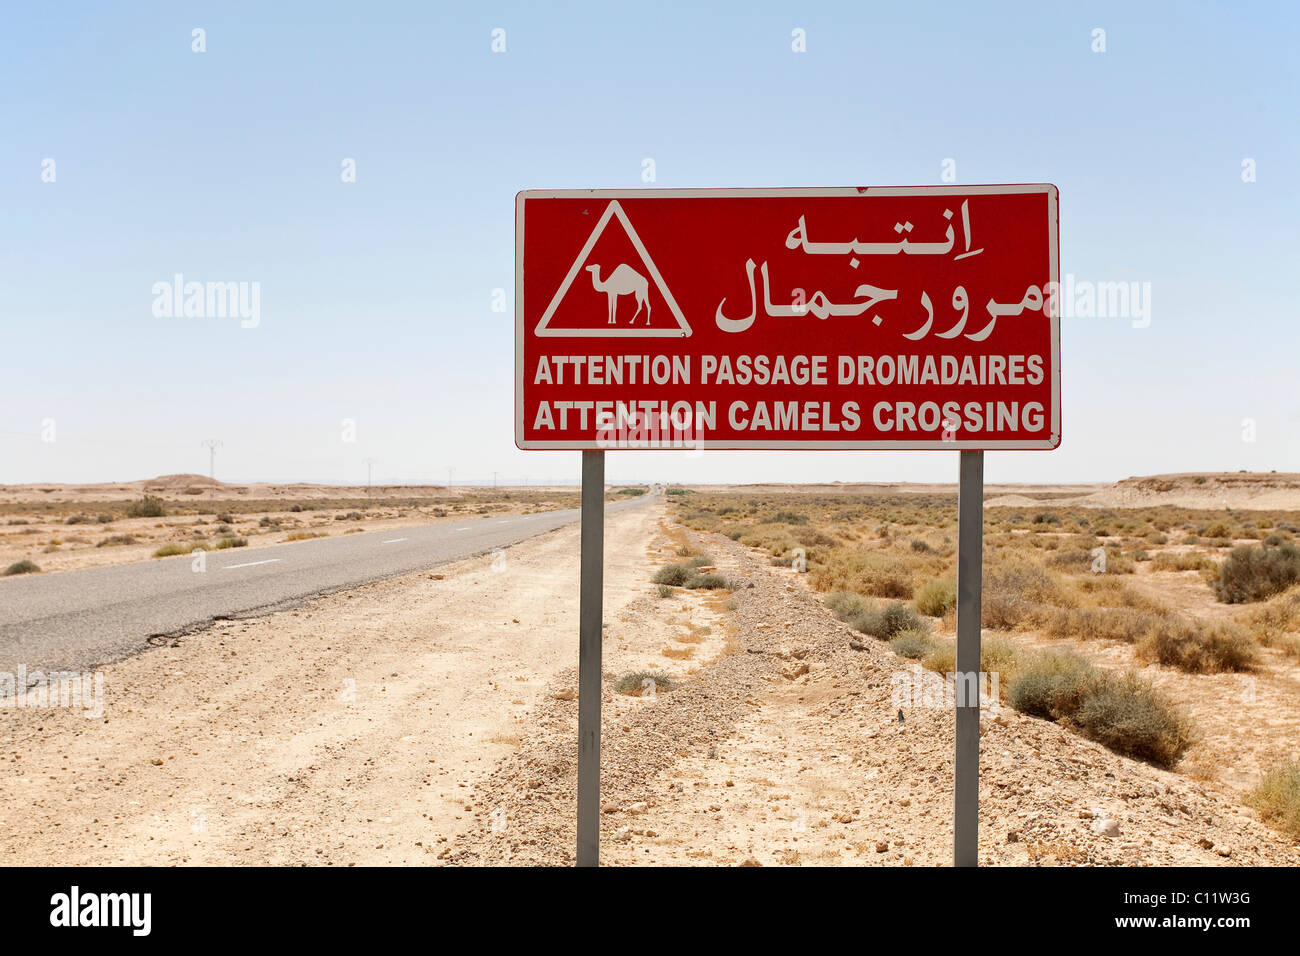 Camel crossing traffic sign in the Sahara, Africa Stock Photo